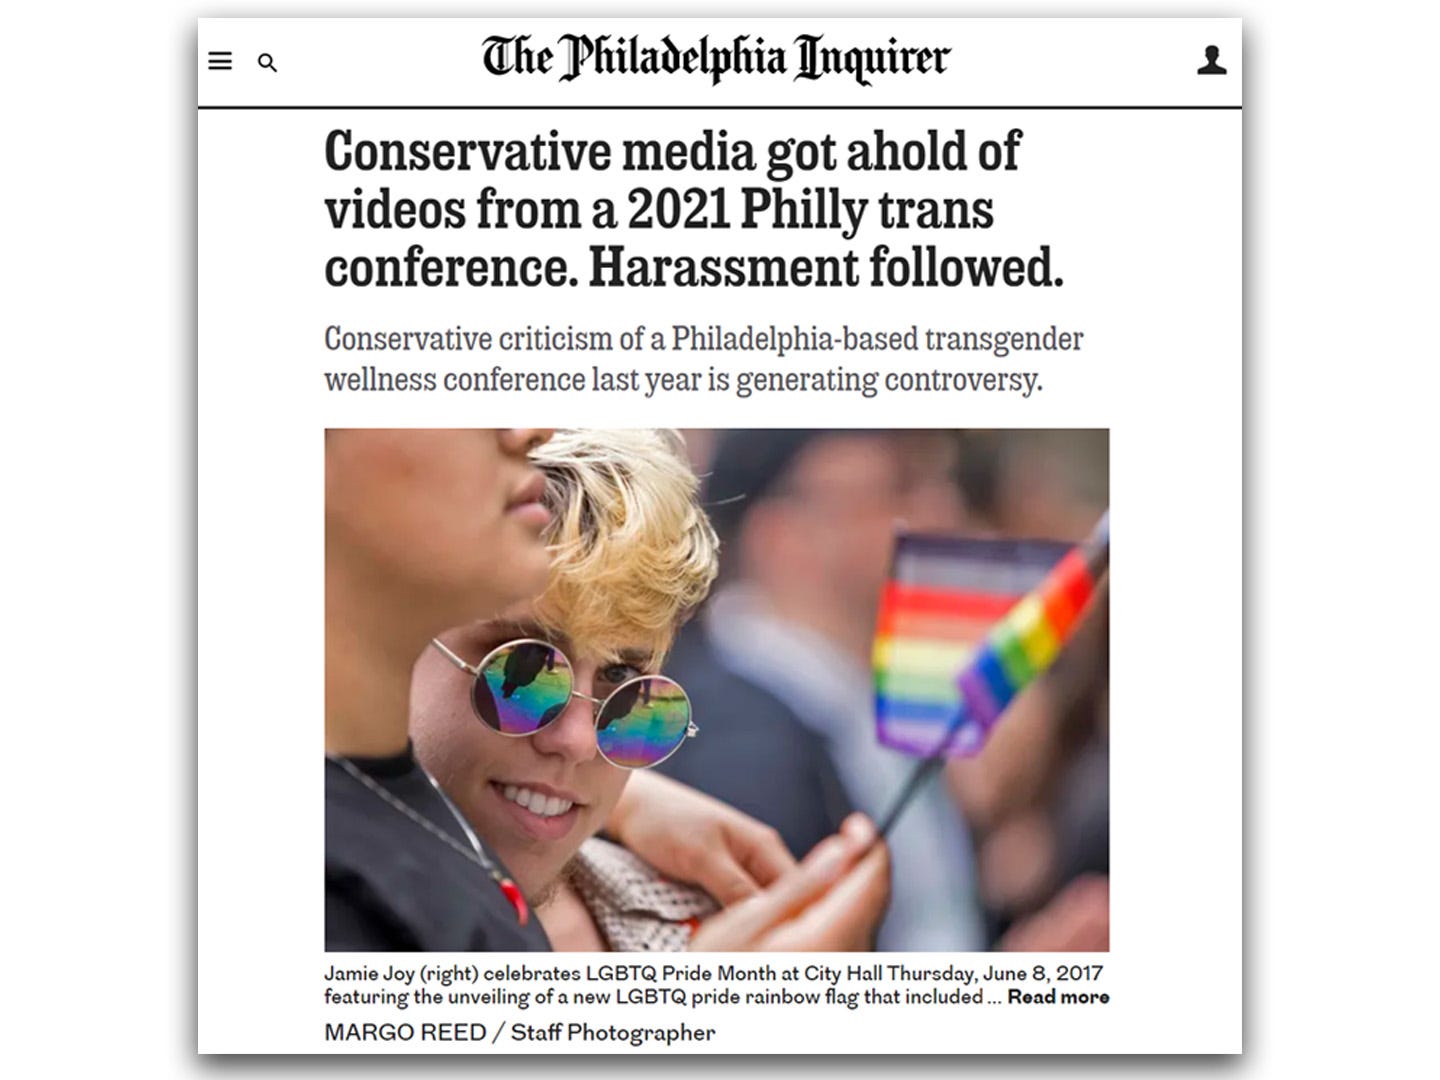 The Philadelphia Inquirer headline, "Conservative media got ahold of videos from a 2021 Philly trans conference. Harassment followed.